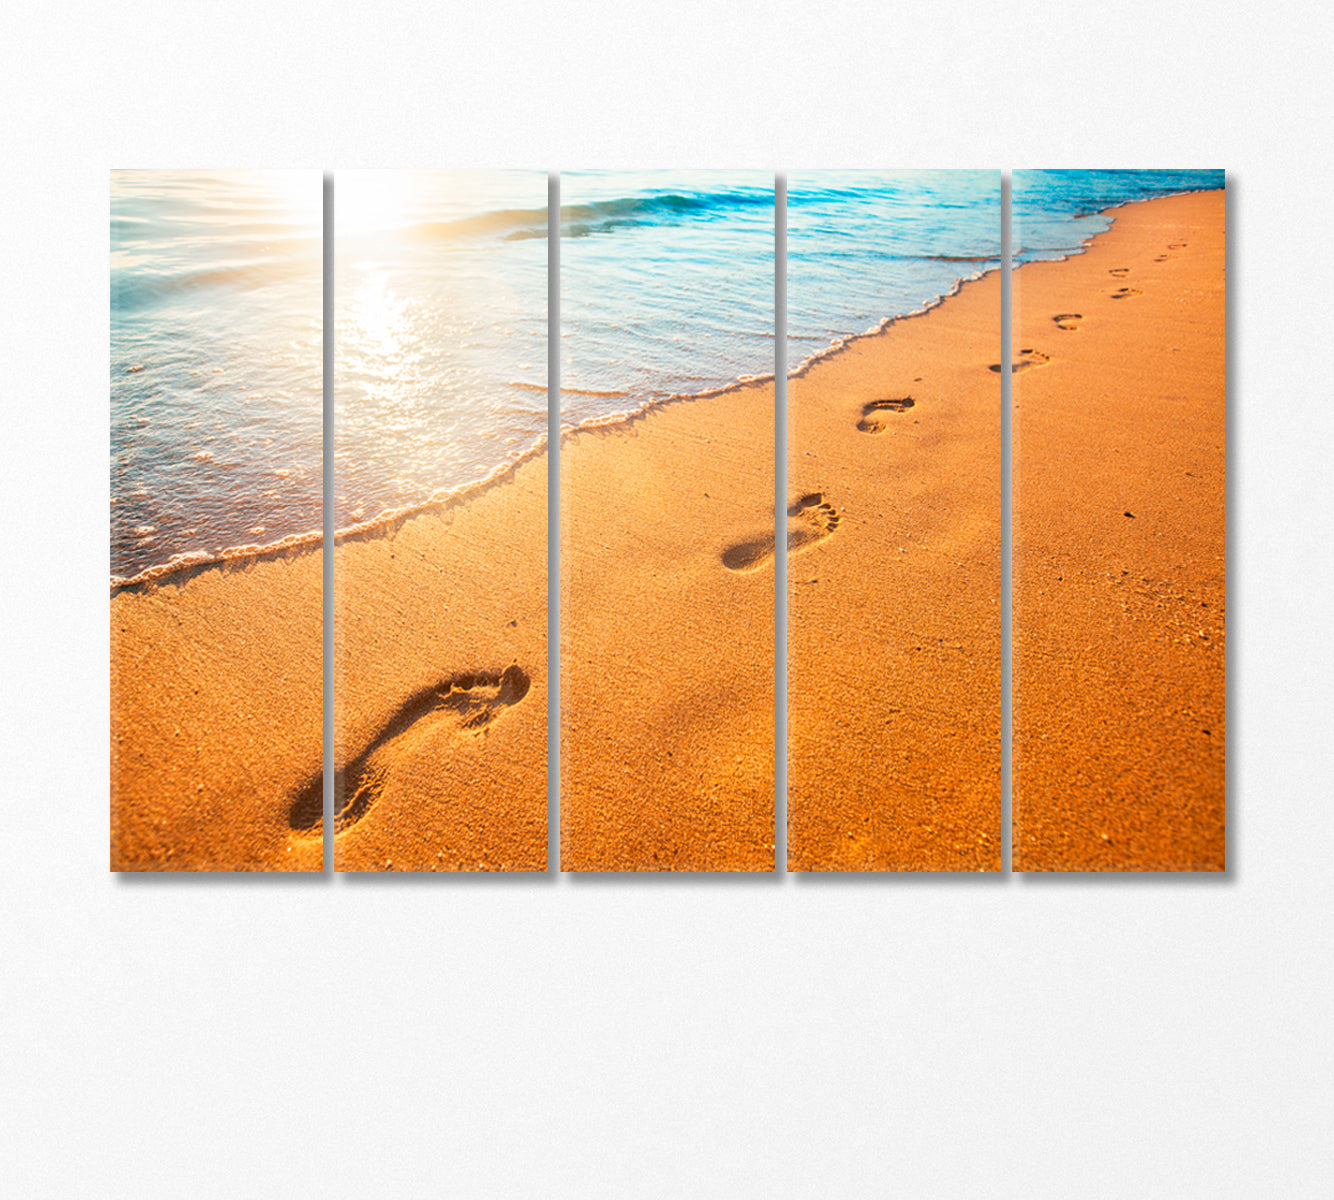 Footprints in the Sand Beach During Sunset Canvas Print-Canvas Print-CetArt-5 Panels-36x24 inches-CetArt